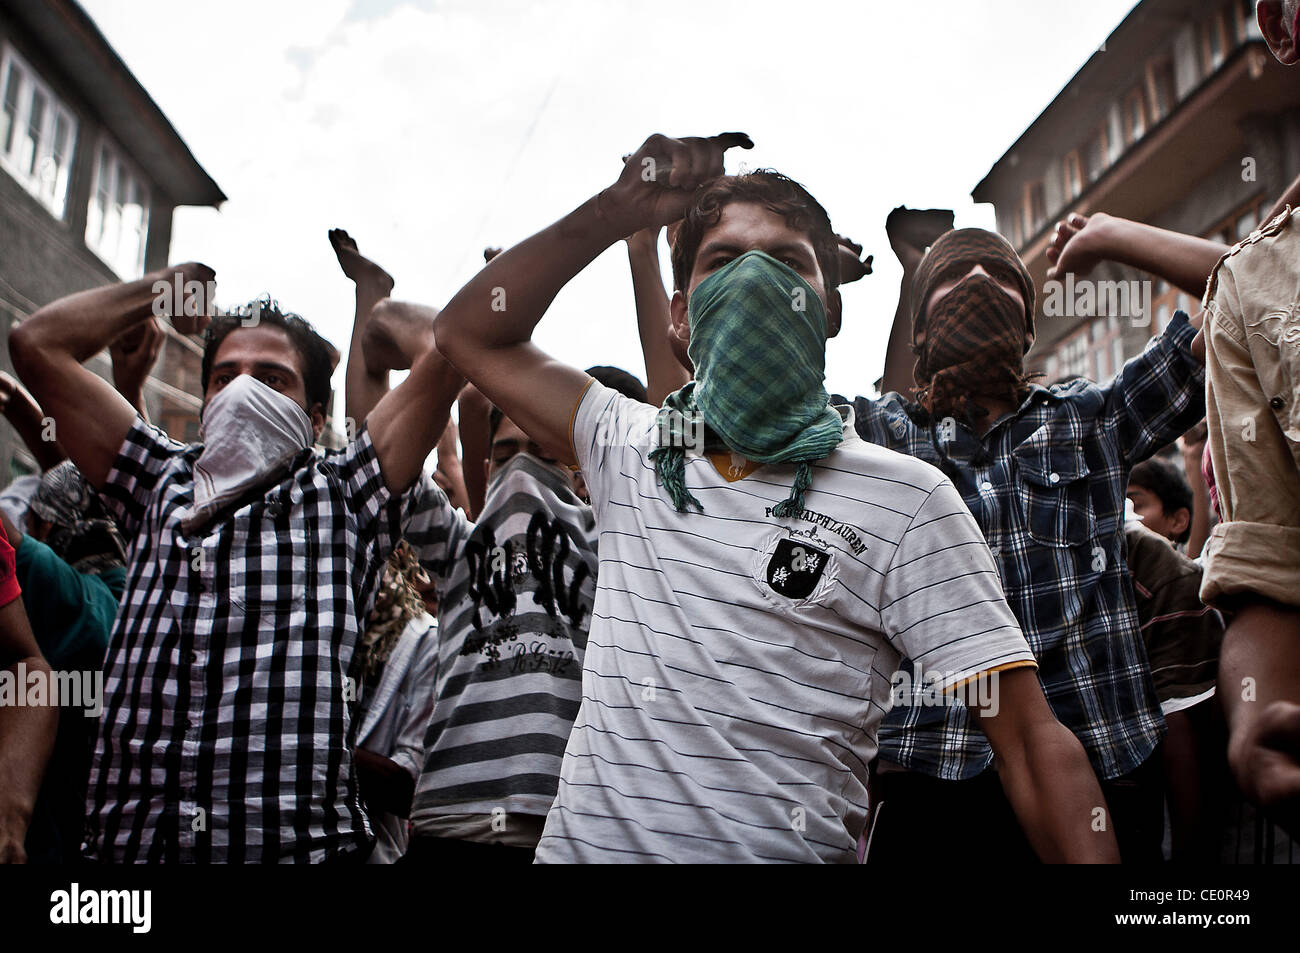 Kashmiri muslim stone pelters shout pro-pakistan slogans during a street protest with the paramilitary indian force and police in downtown of Srinagar. Protest was held in Nowhatta area by stone-throwing youths against Indian's rule in disputed territory of Kashmir, where anti-India sentiment runs d Stock Photo